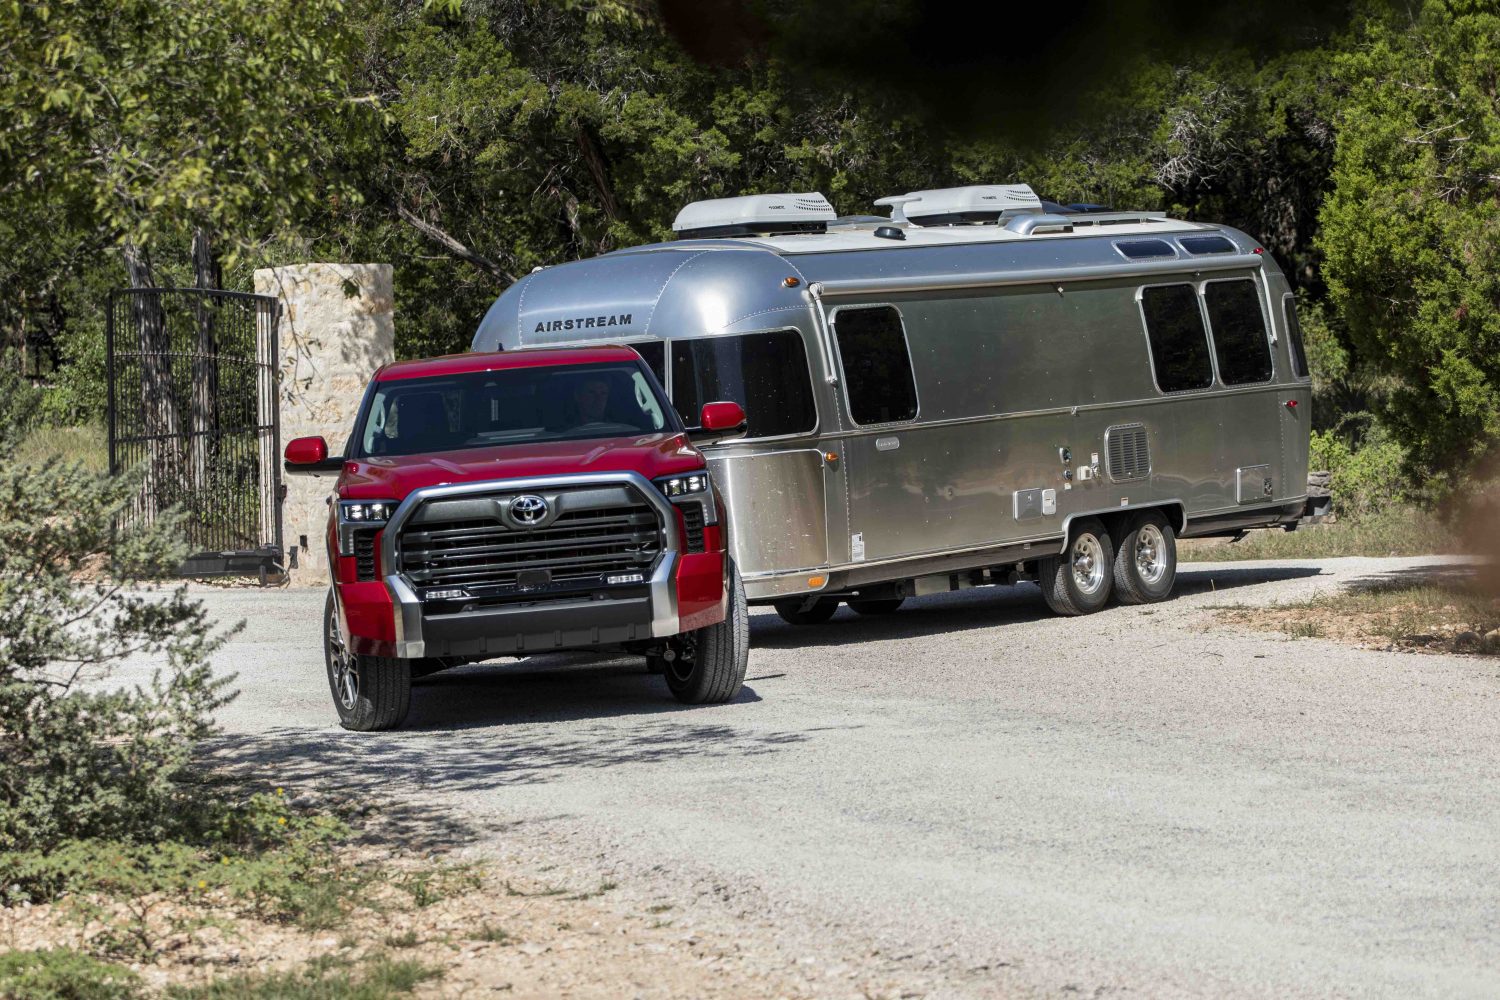 Red Toyota Tundra pickup truck towing an airstream camper trailer.